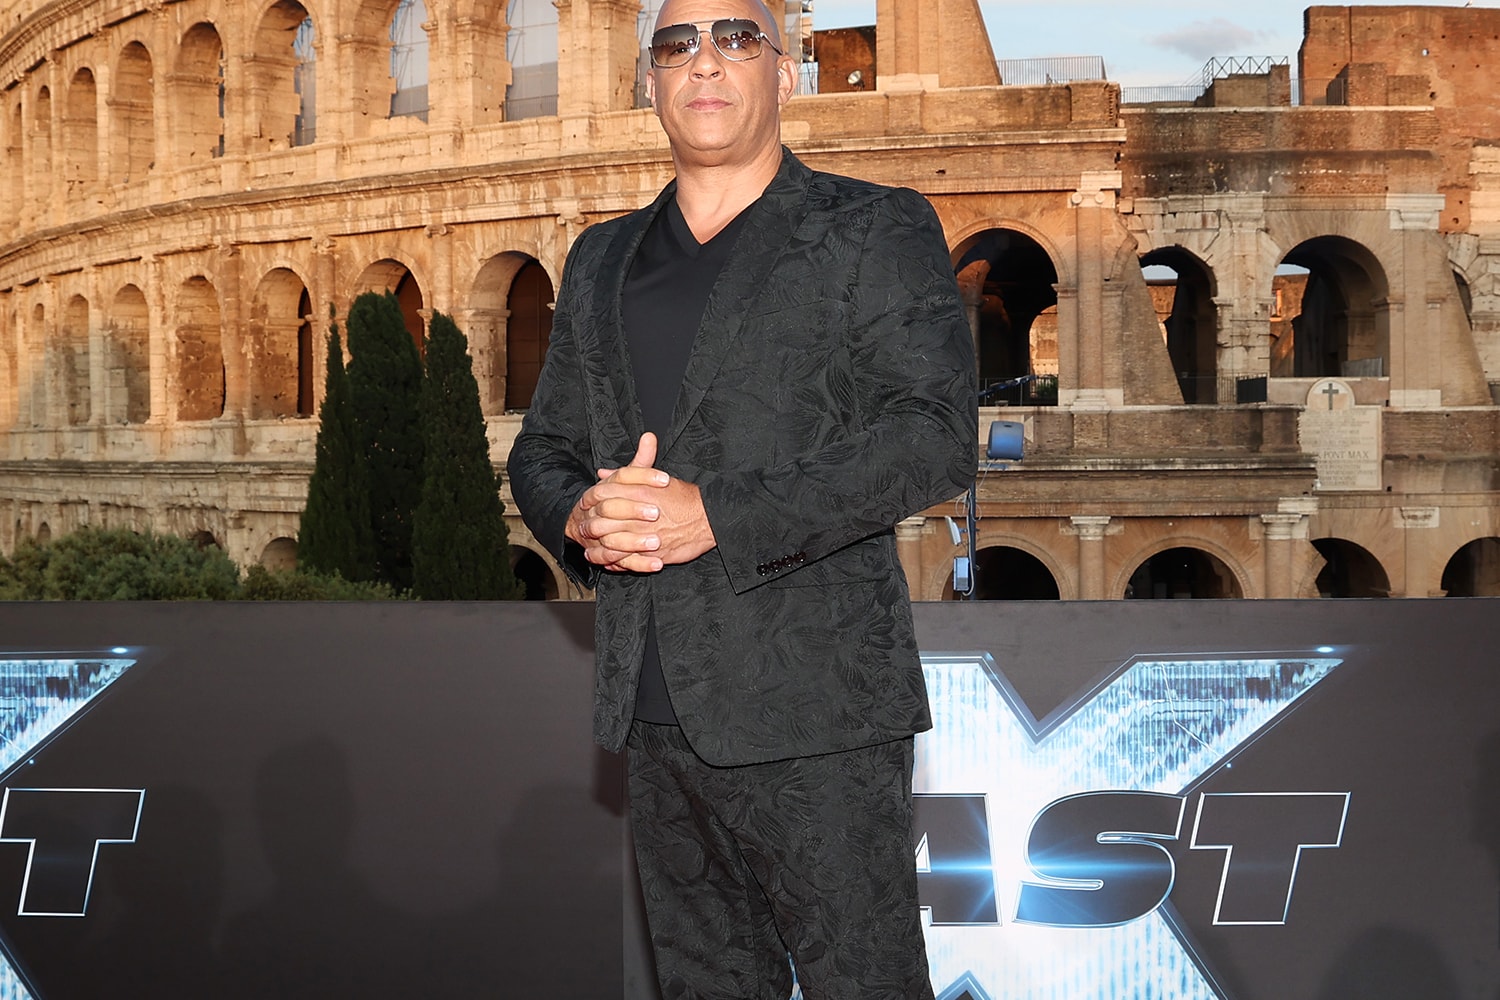 Twitter thinks Vin Diesel is the first man ever created